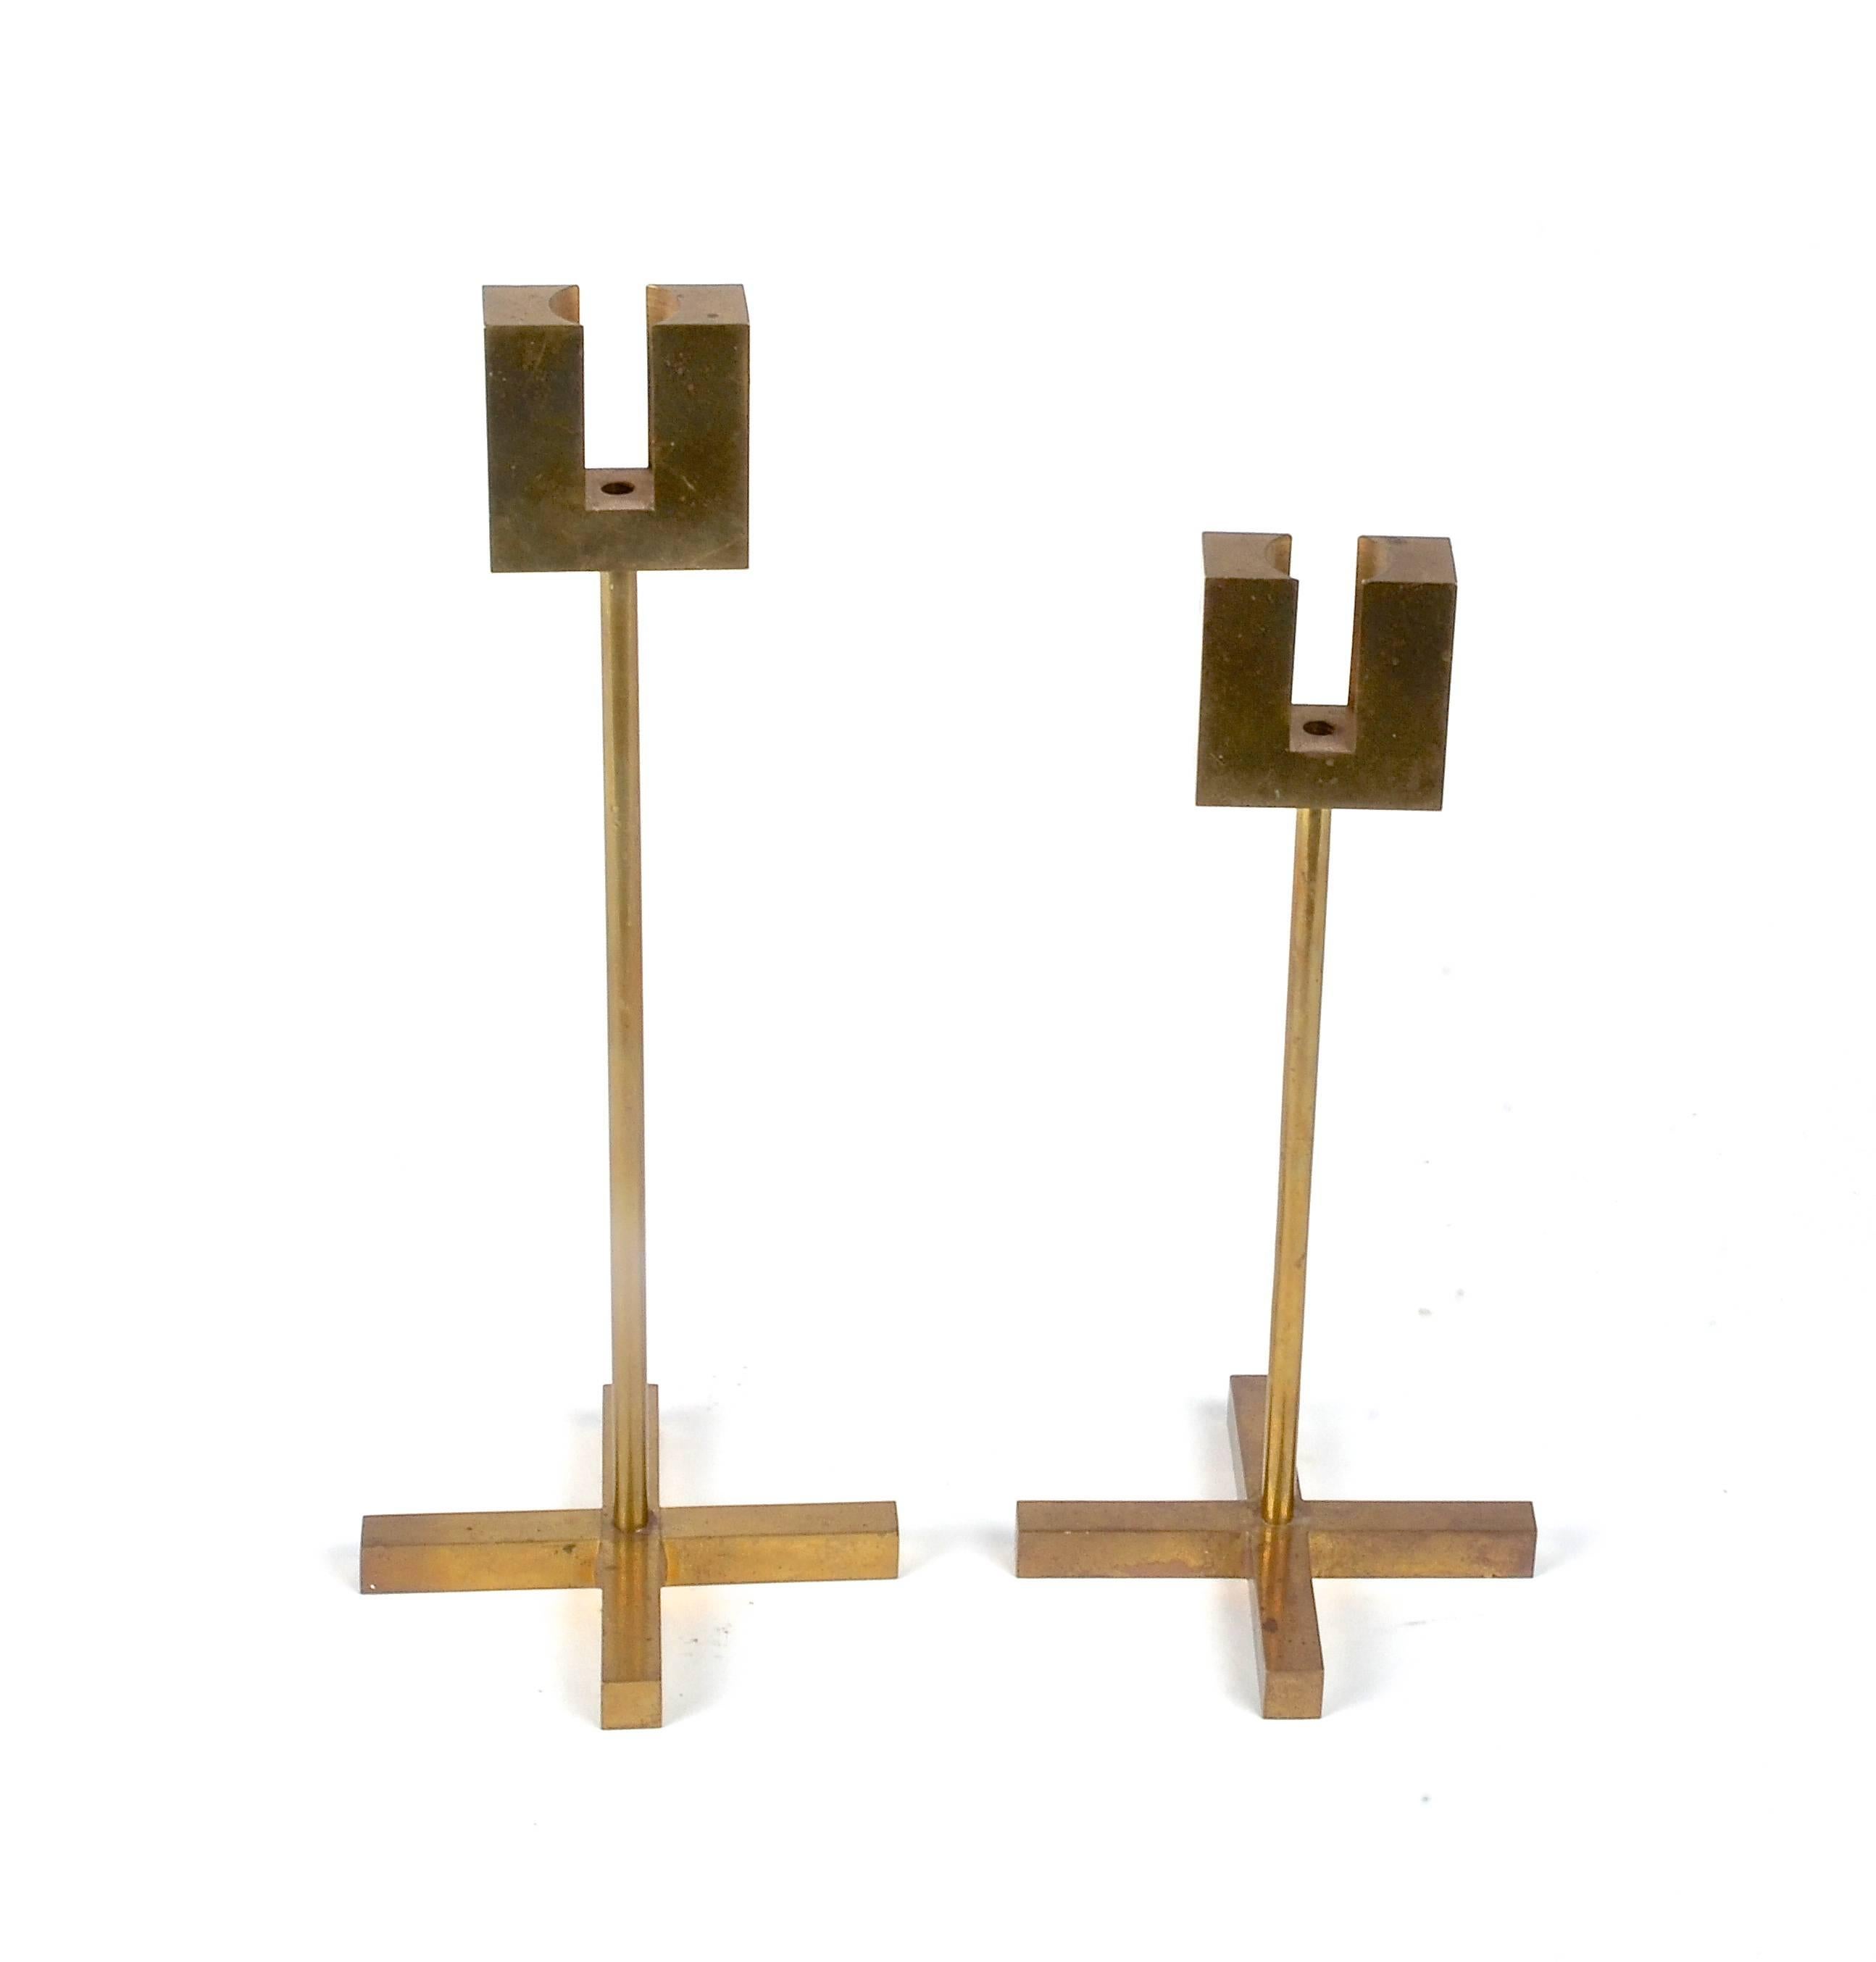 A pair of candlesticks in brass, designed by Pierre Forssell for Skultuna 1607, Sweden, mid-1900s.